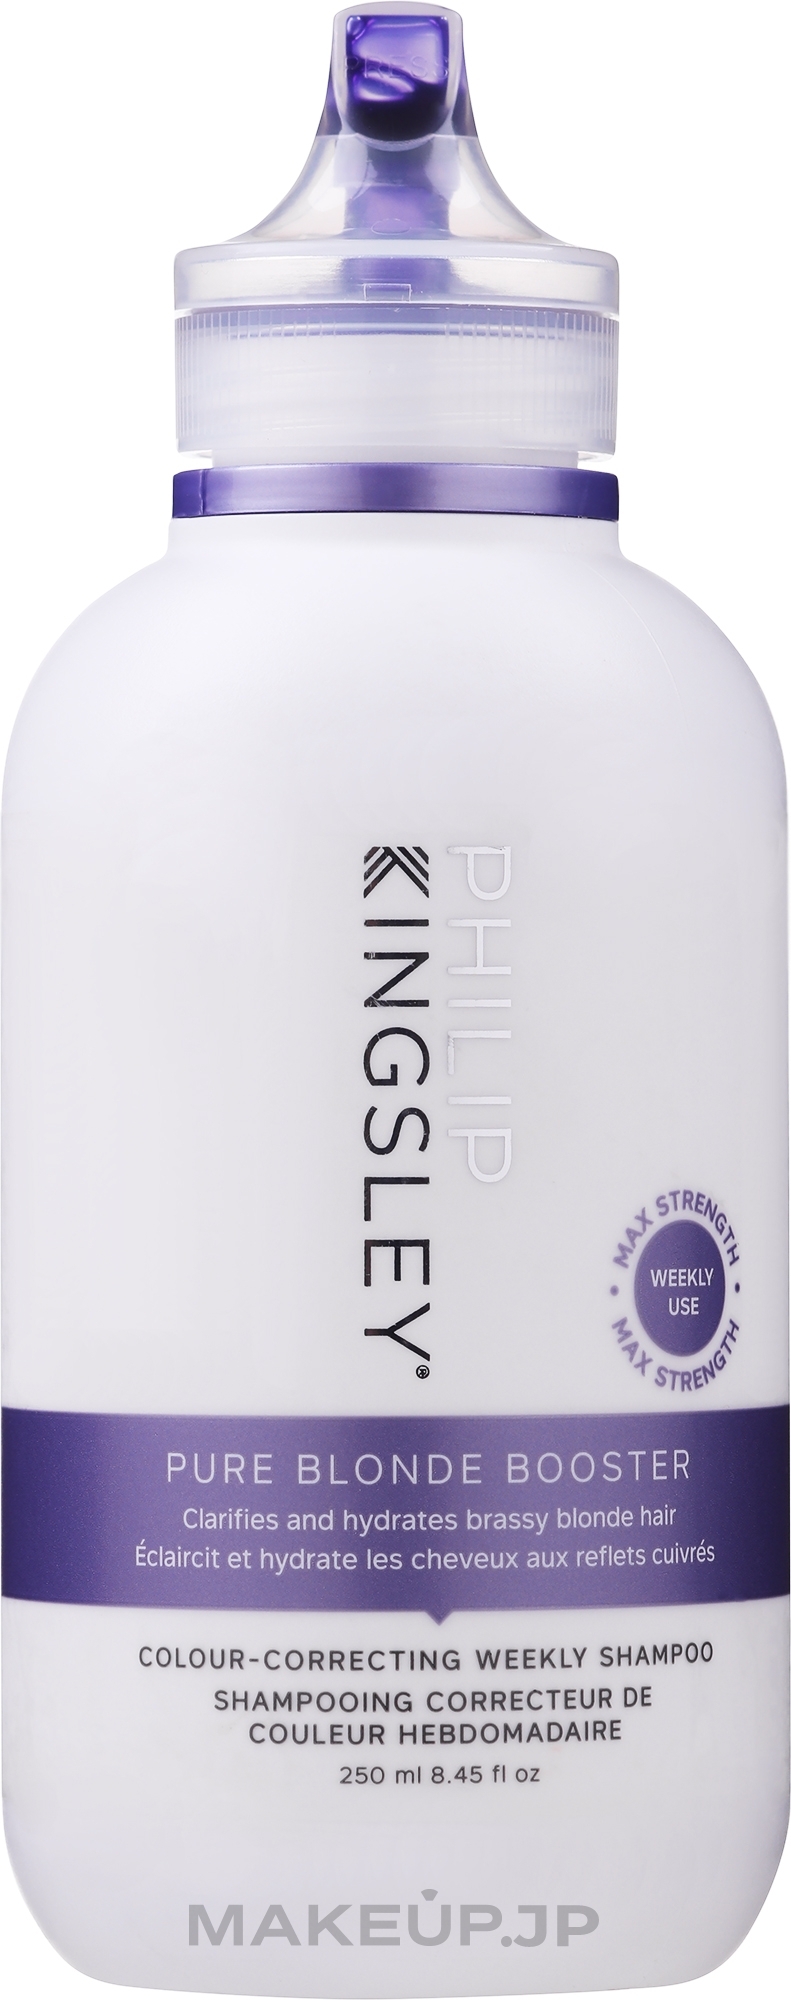 Booster Shampoo for Blonde Hair - Philip Kingsley Pure Blonde Booster Shampoo — photo 250 ml